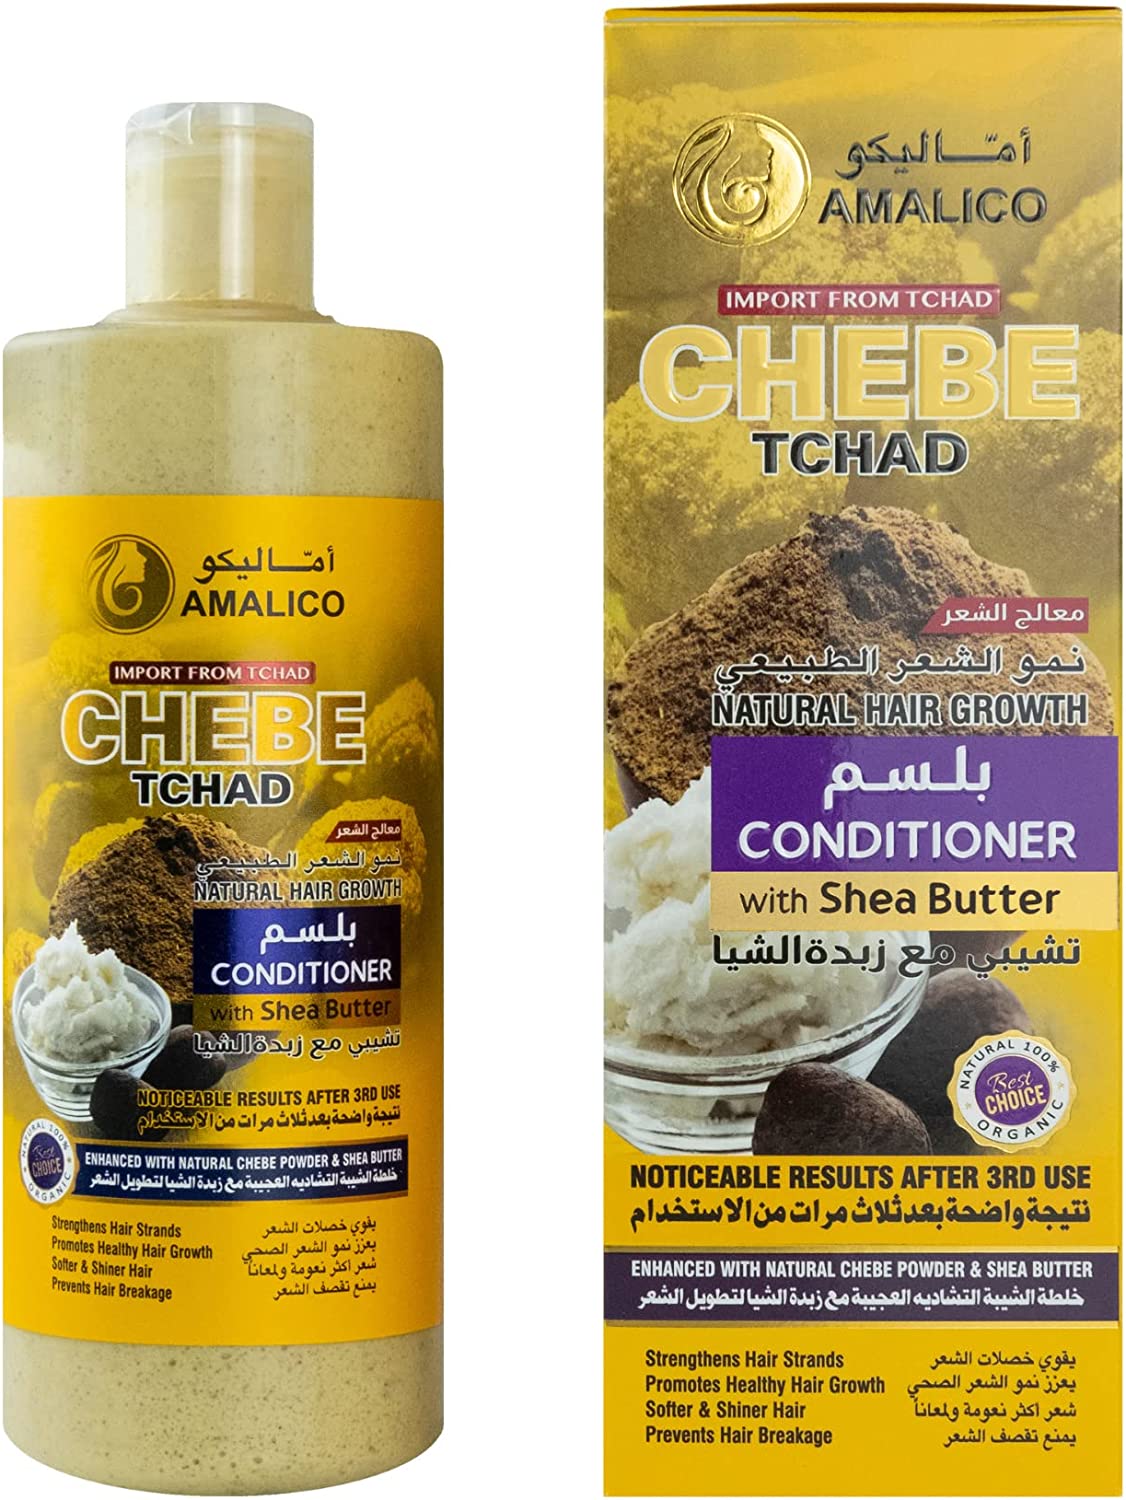 Amalico Chebe Tchad Conditioner With Shea Butter